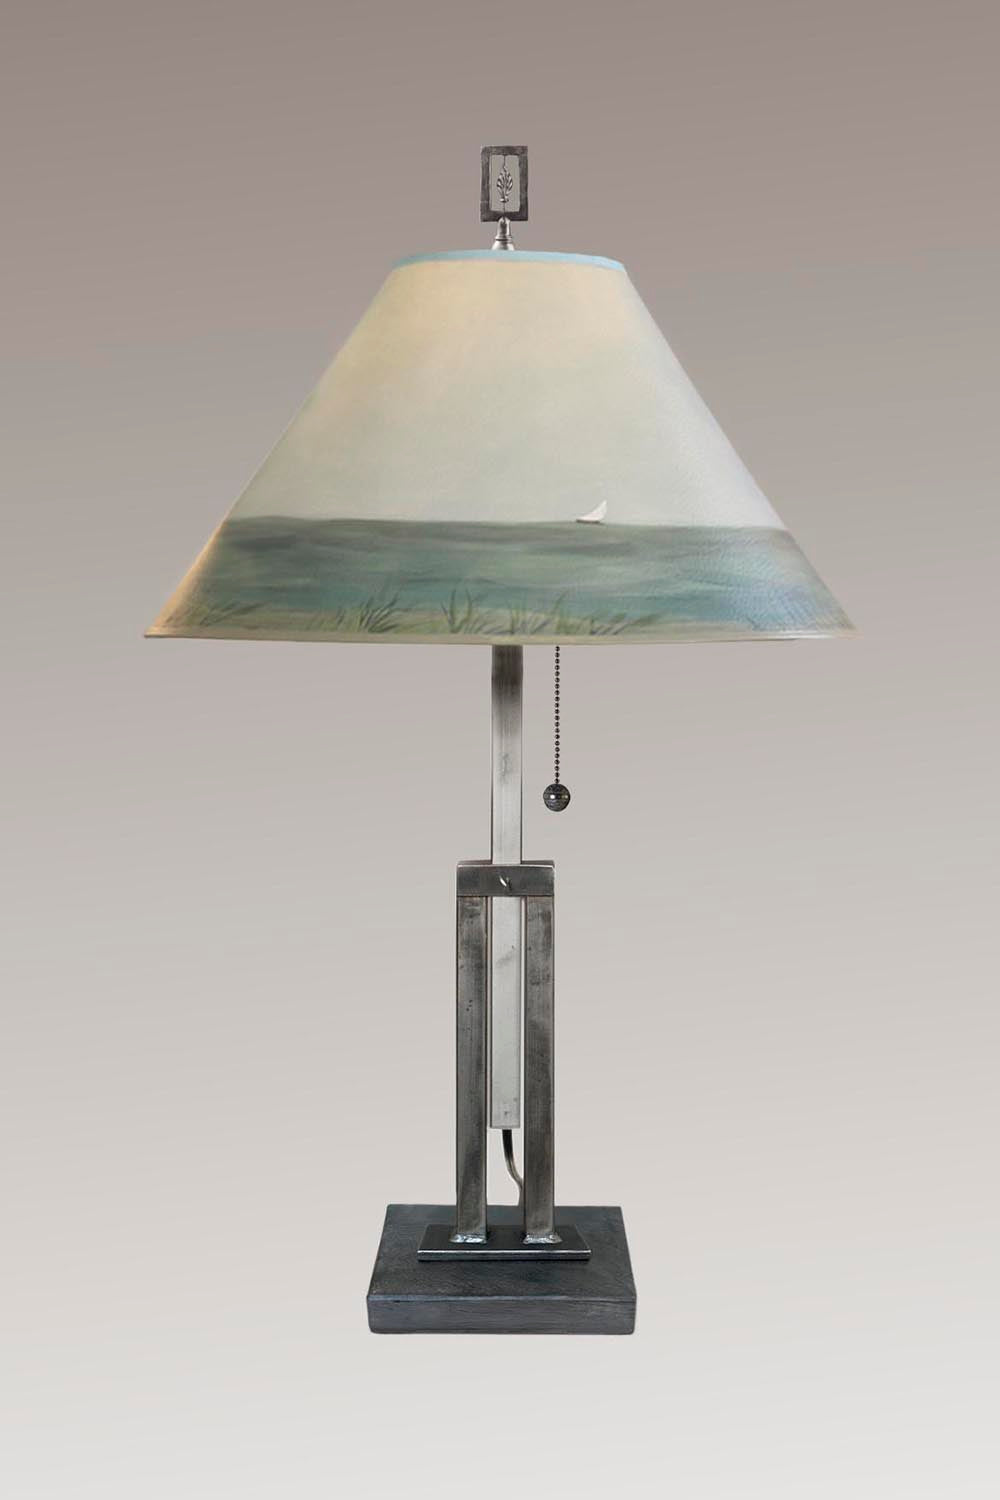 Janna Ugone & Co Table Lamps Adjustable-Height Steel Table Lamp with Large Conical Shade in Shore